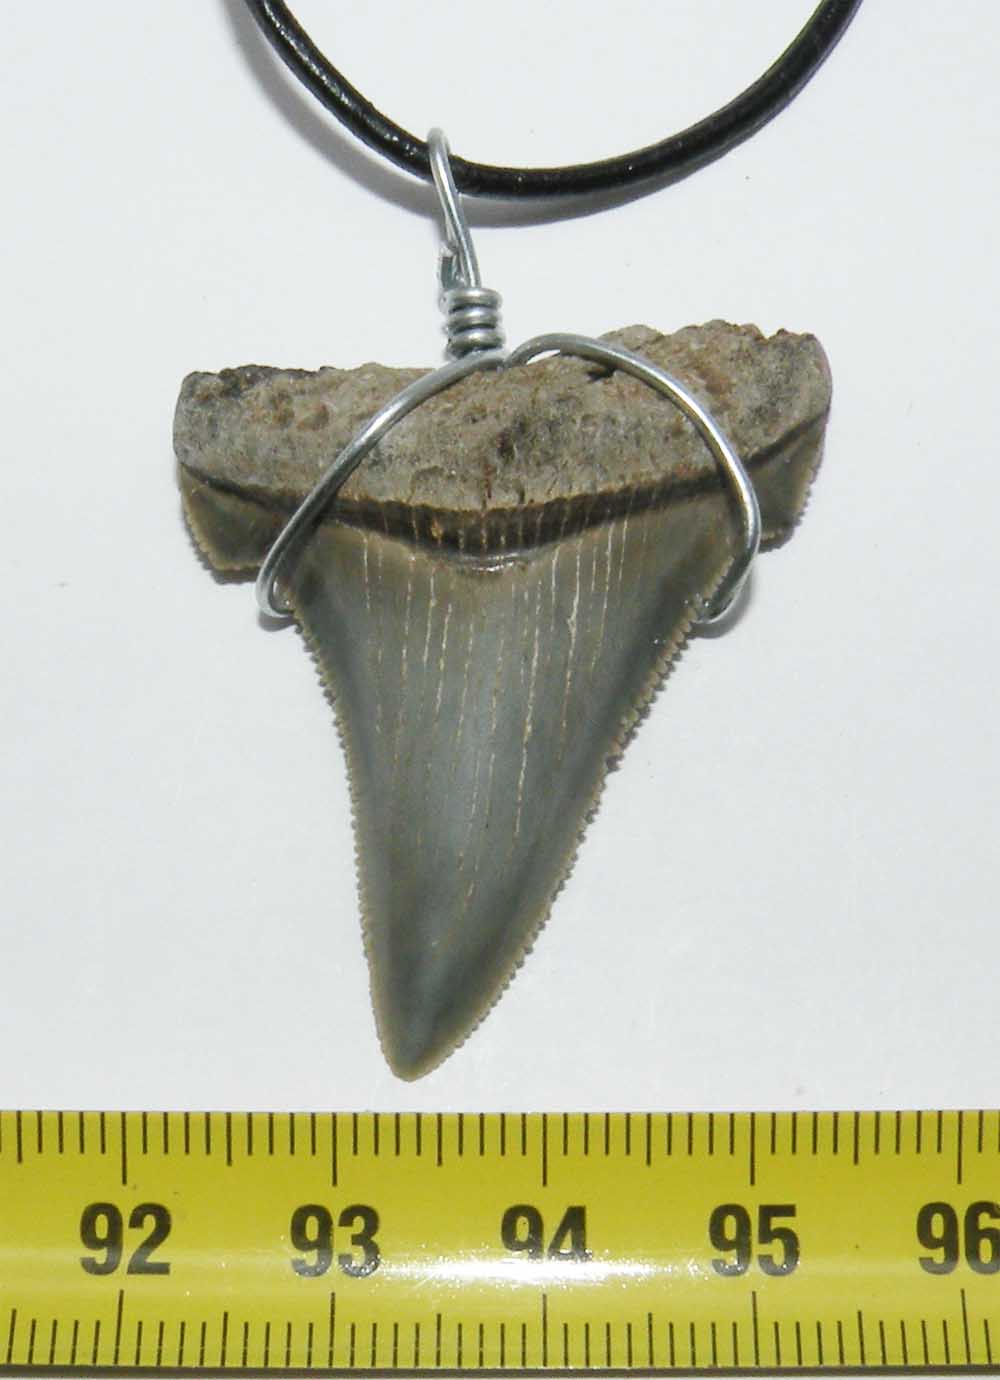 https://www.nuggetsfactory.com/EURO/megalodon/collier/56%20collier%20a.jpg